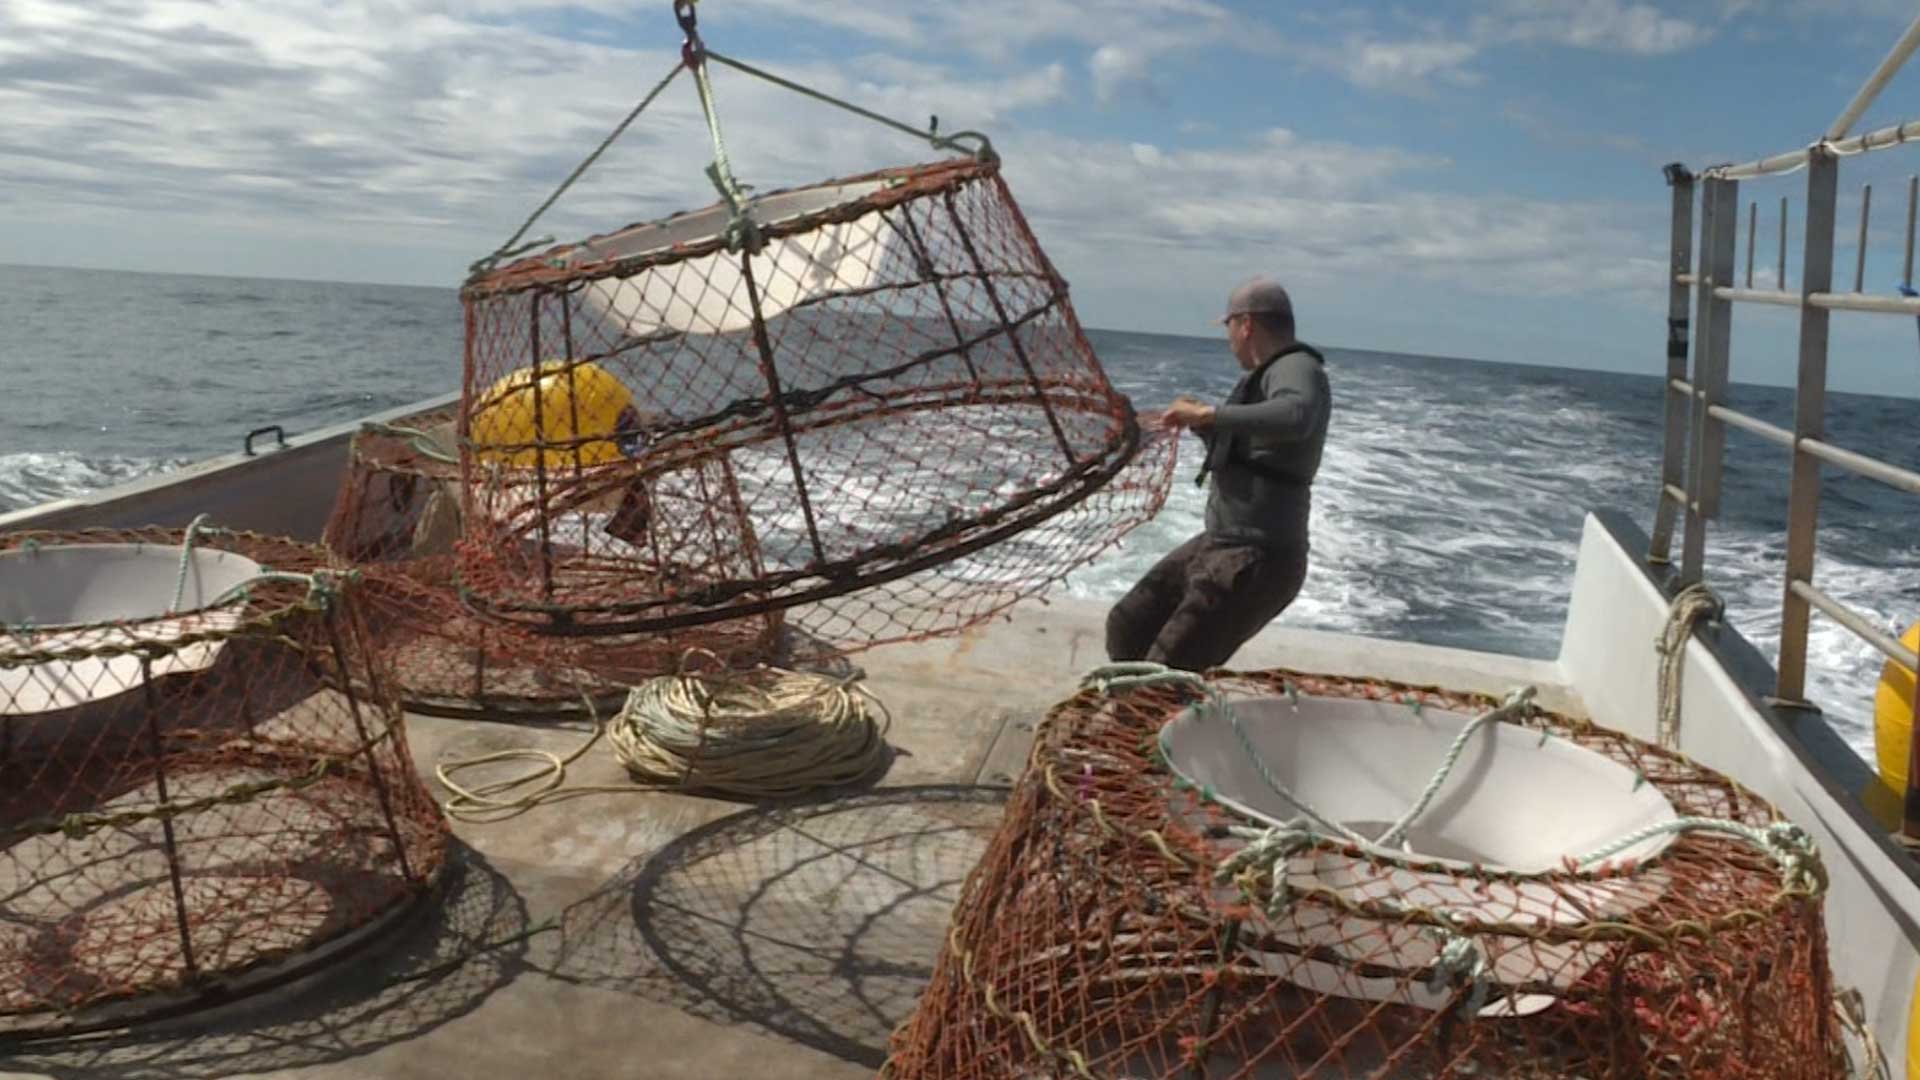 Crab traps seized by DFO during Mi'kmaw food fishery